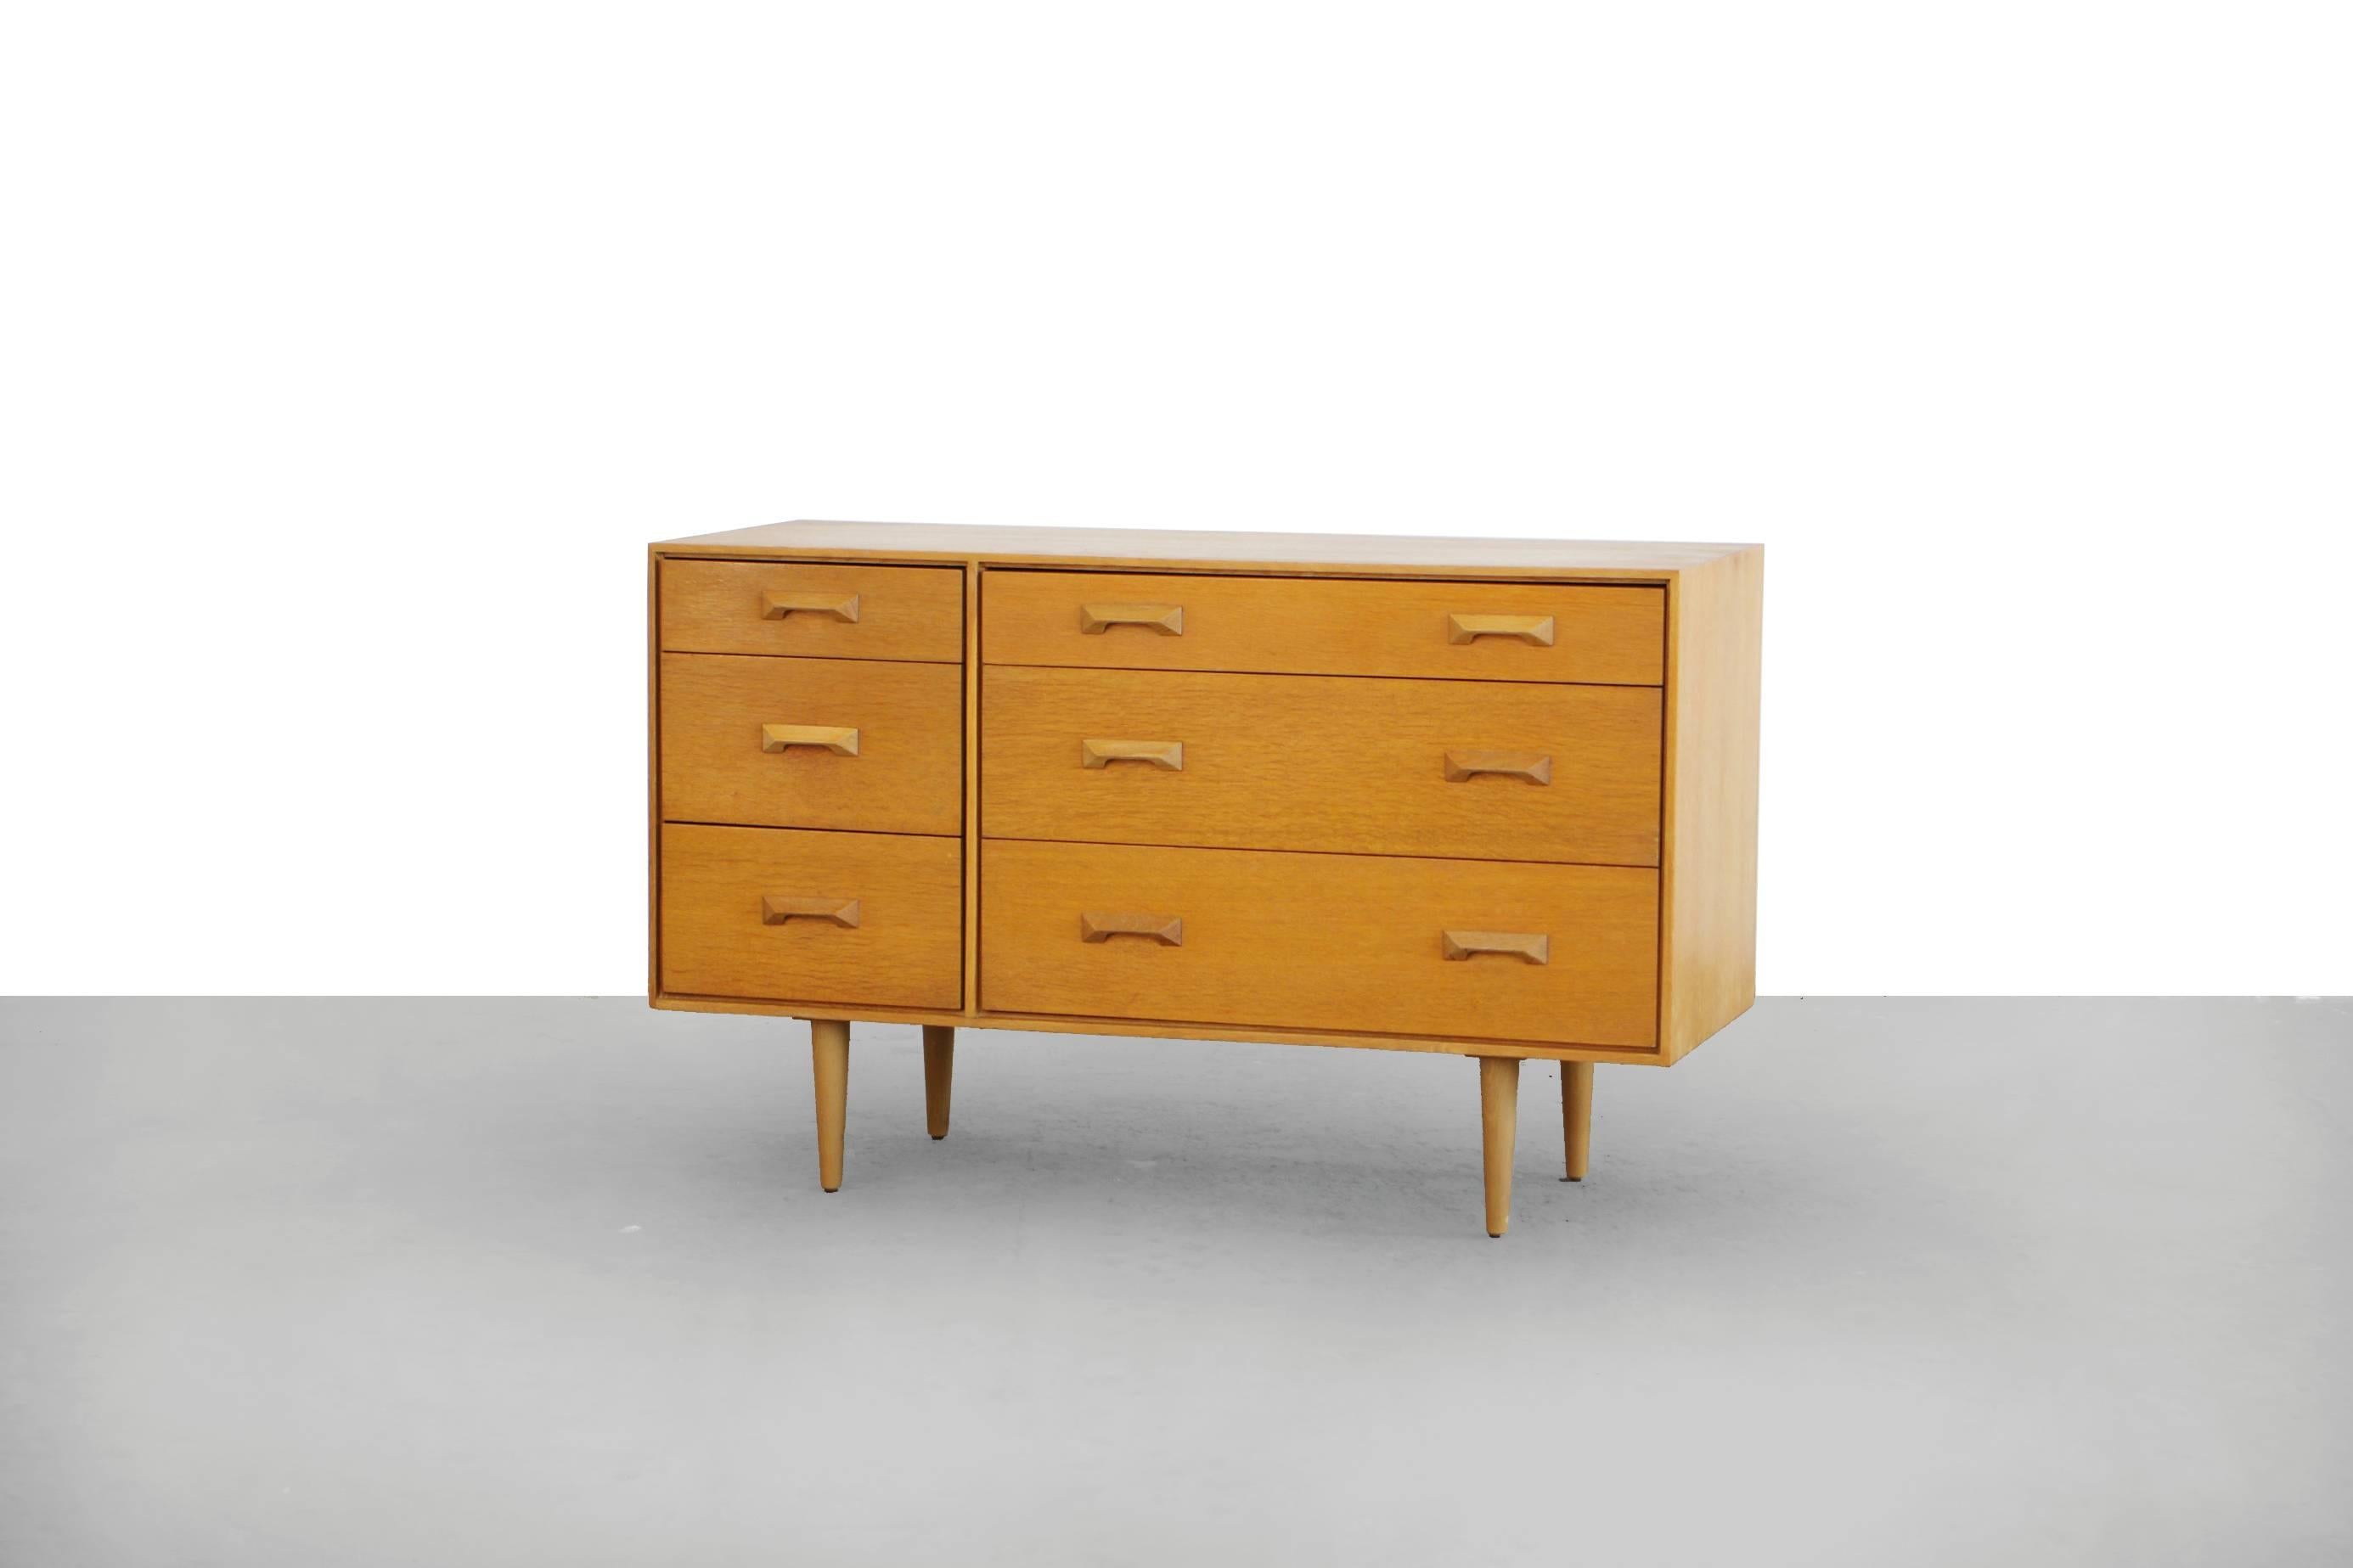 A fabulous chest of drawers by the highly regarded John & Sylvia Reid. Manufactured by Stag this is from the 'Concorde' range. Made with oak veneers, it has beautiful handles. In very good vintage condition with a few scratches and repaired spots.